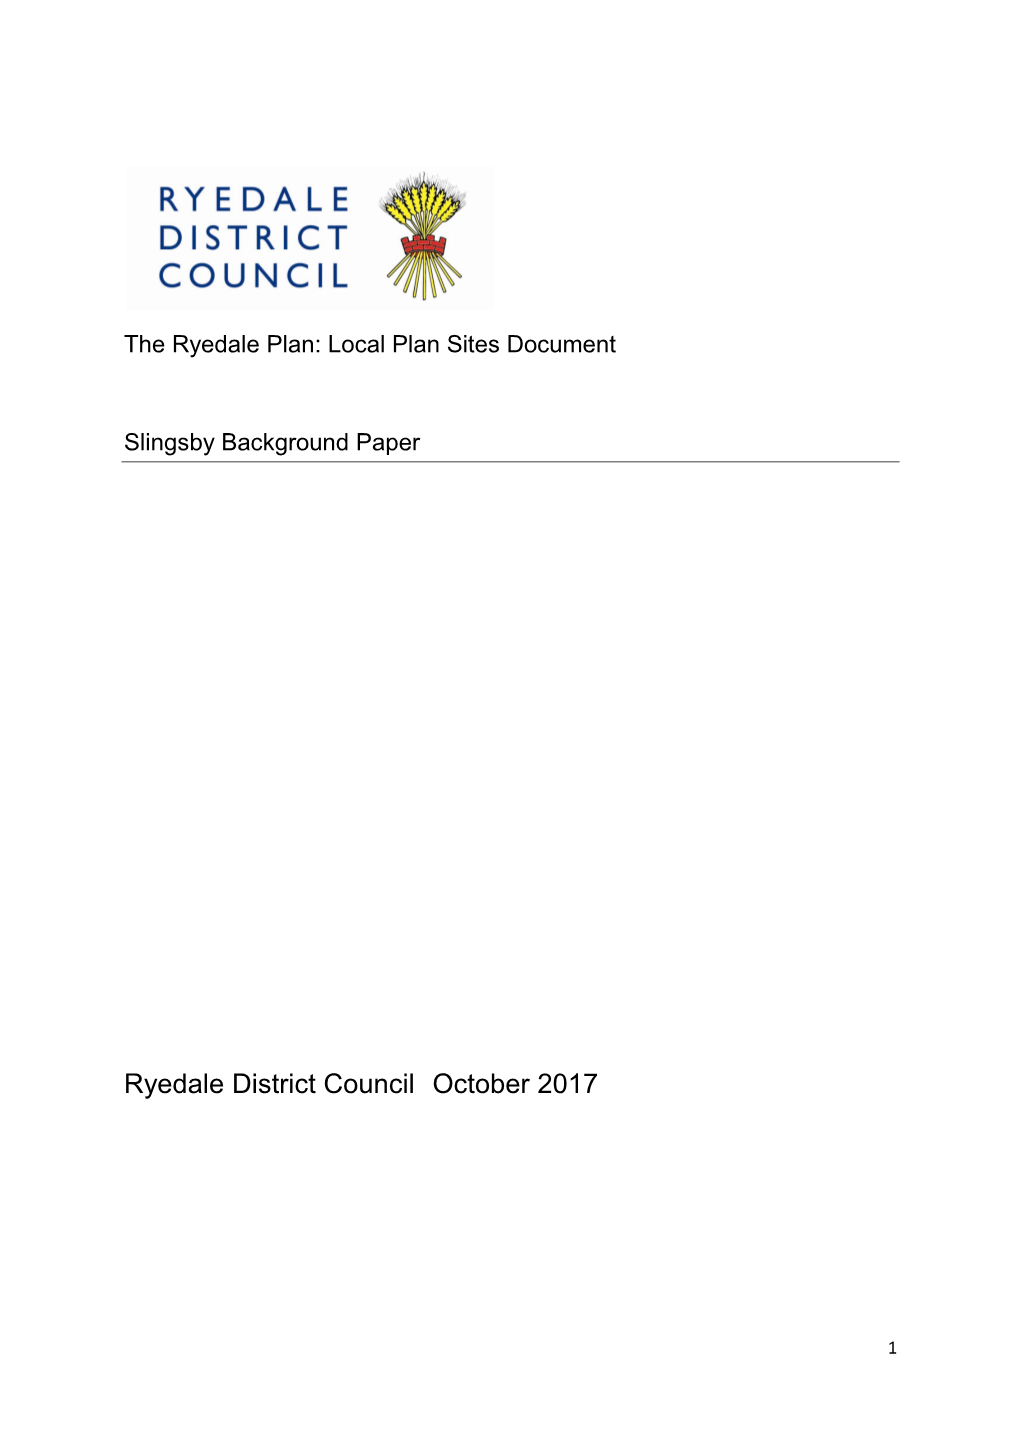 Local Plan Sites Document Slingsby Background Paper